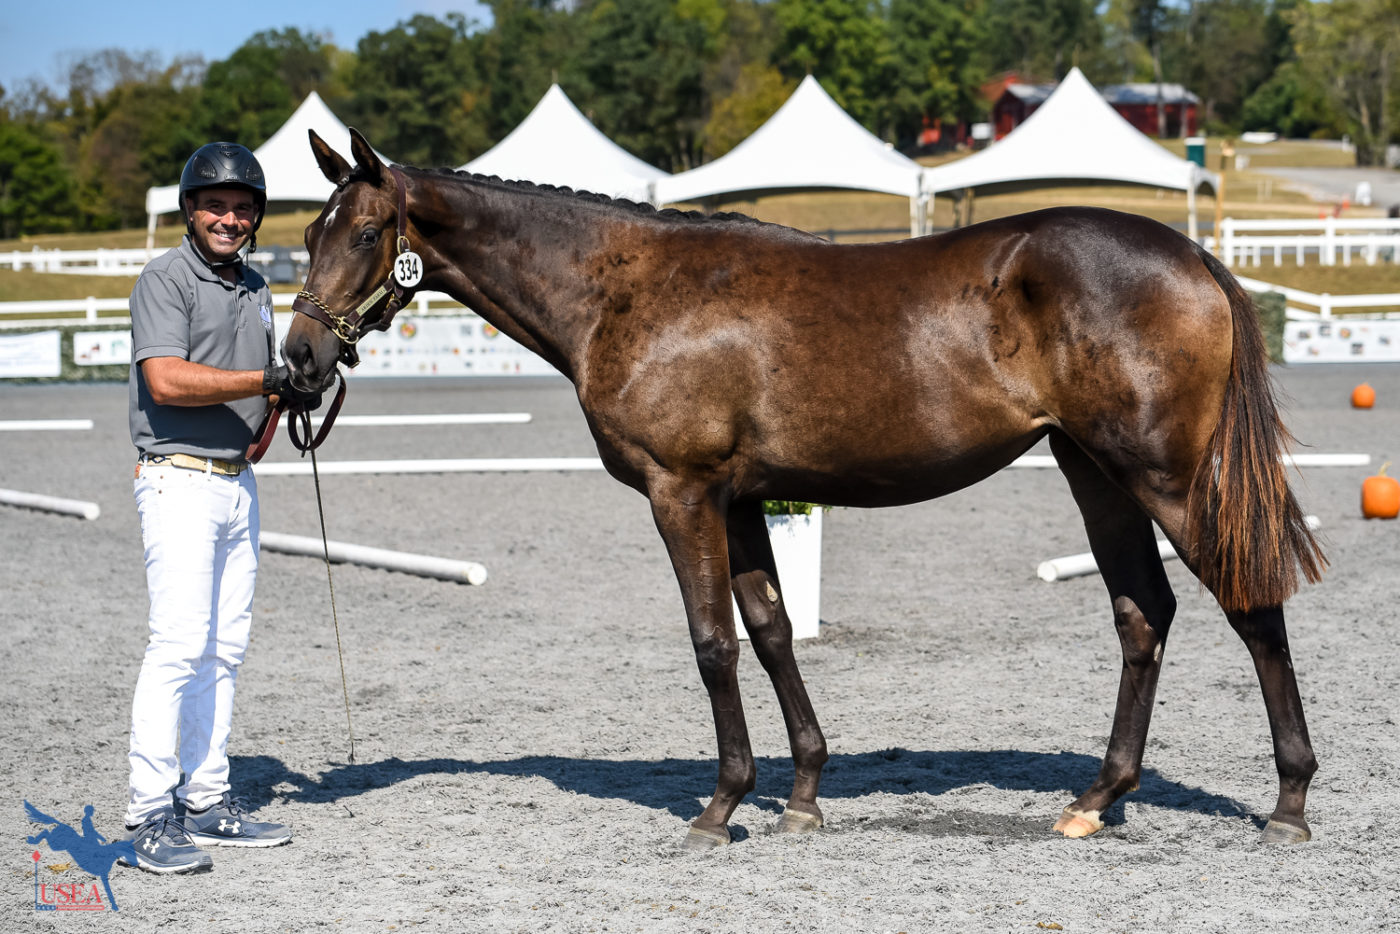 Yearling 1st - Arden Nike - 85.30